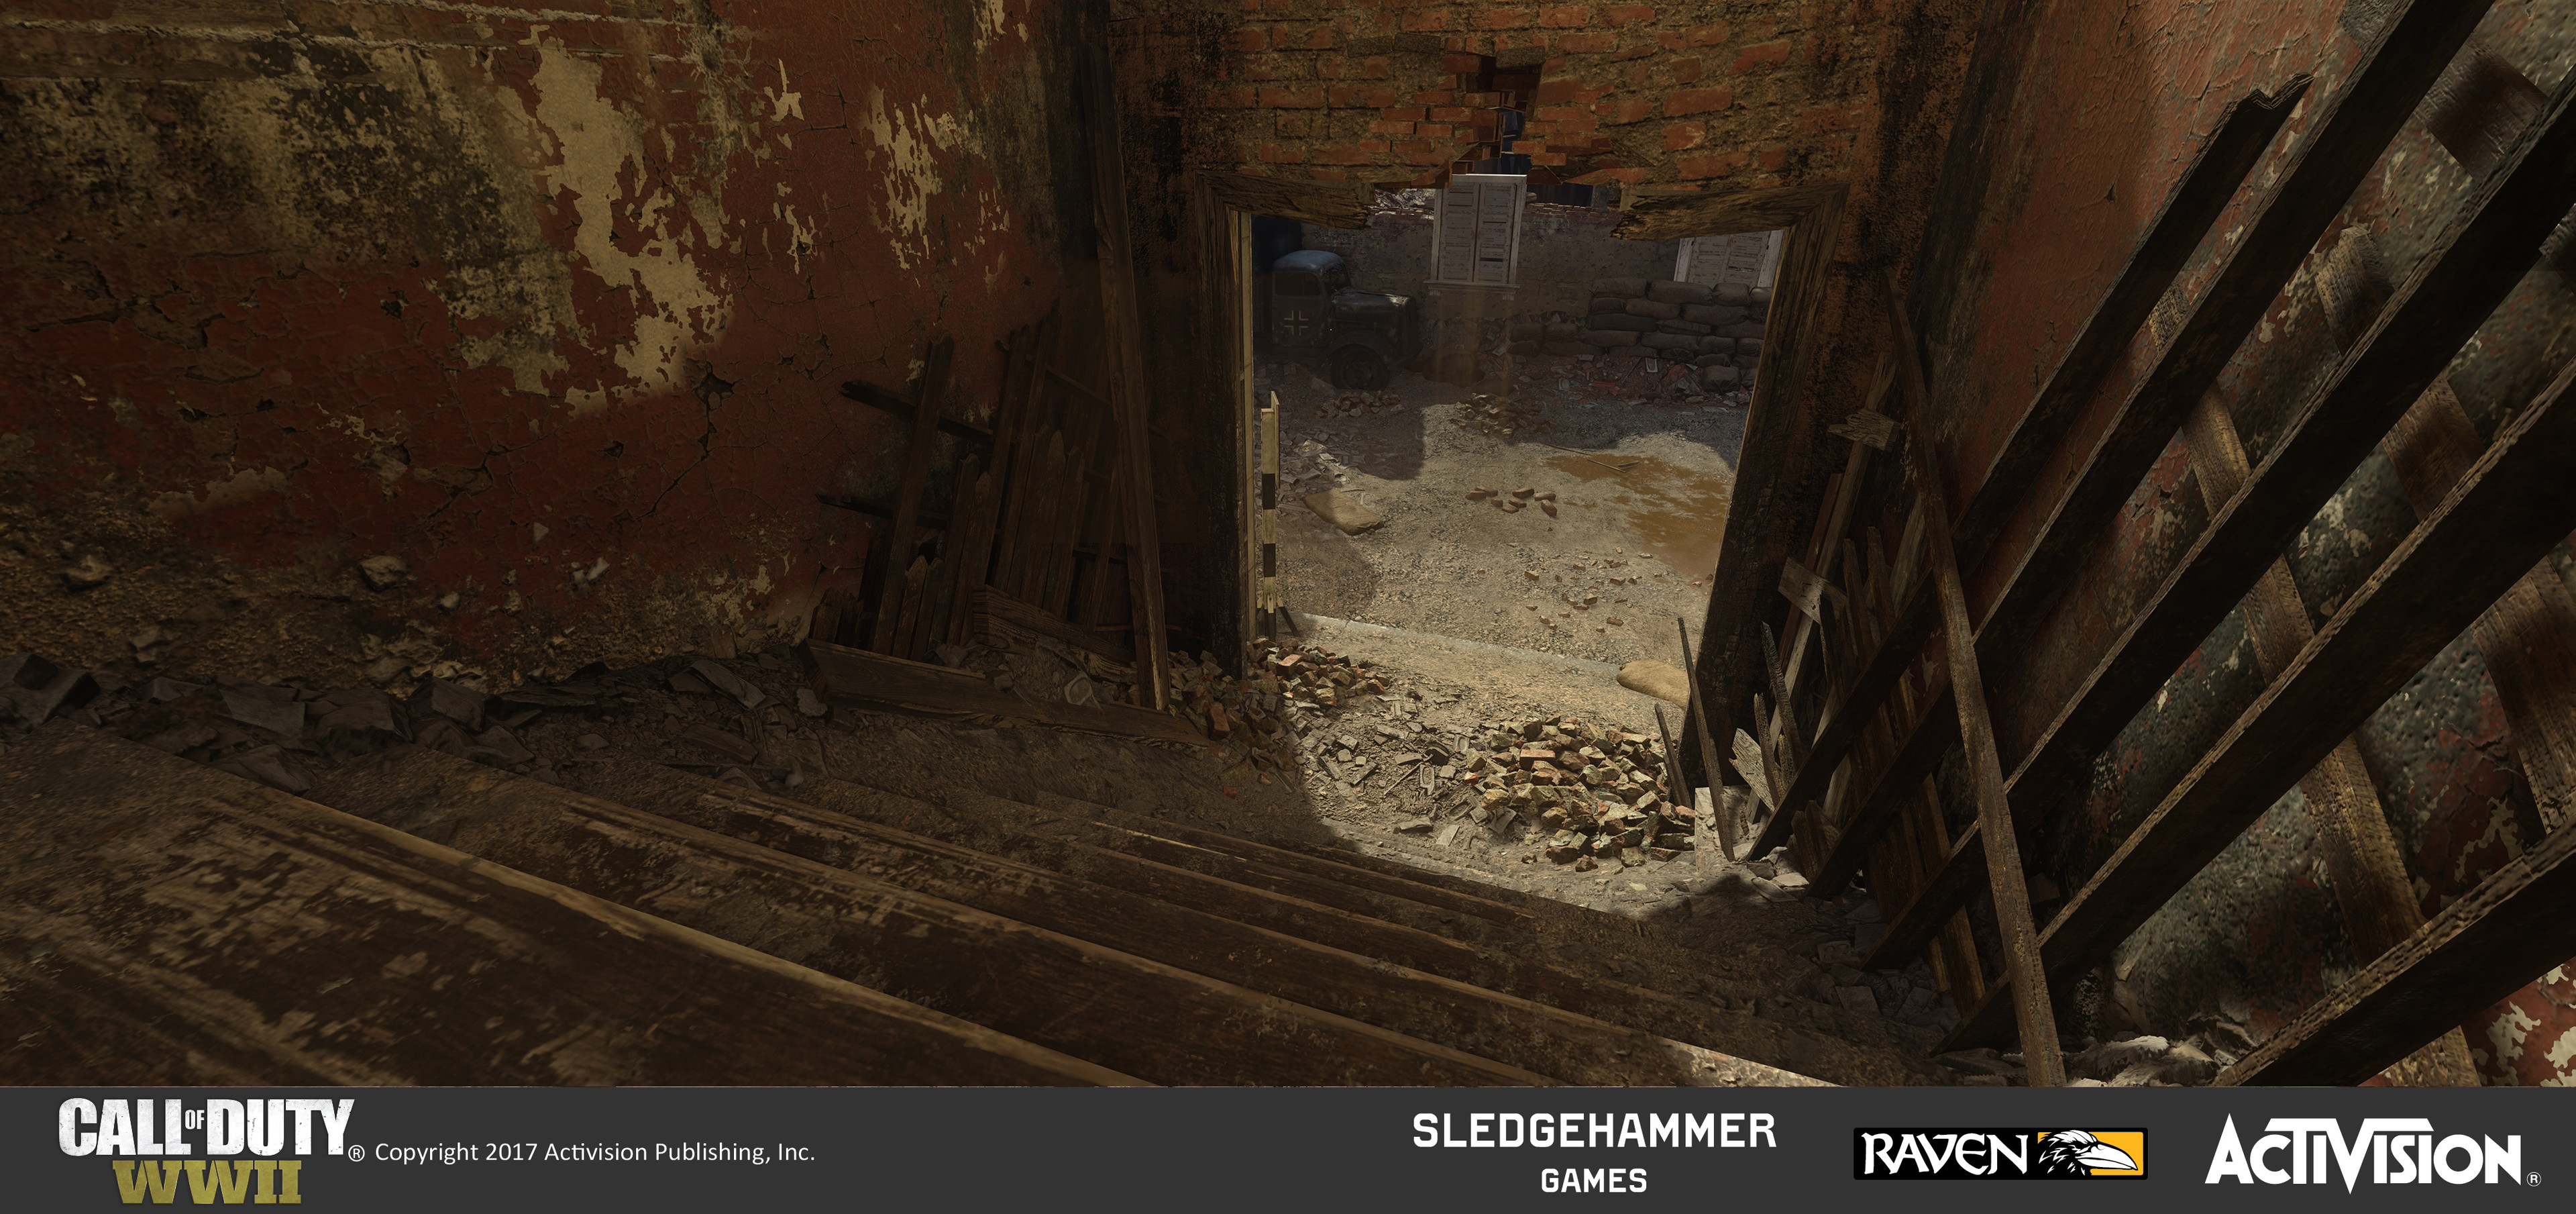 I created the geo for the stairwell, debris pile, and destroyed walls on both sides. I applied pre-existing materials as a unique treatment to this area. Our effects department added a falling dust effect under the bricks over the door frame. 